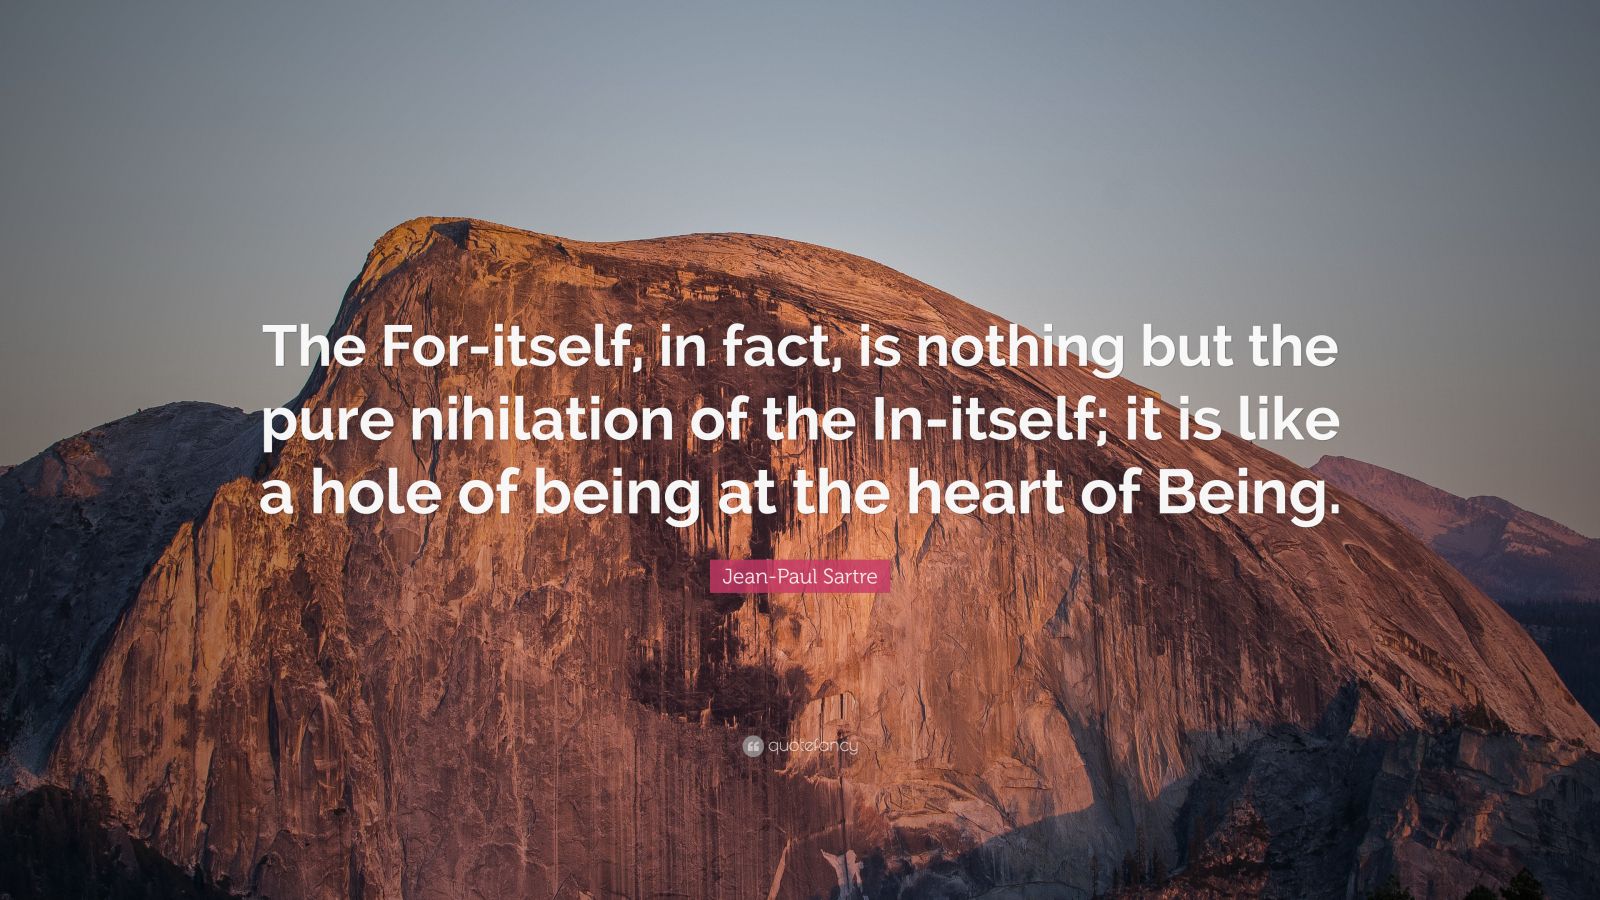 Jean-Paul Sartre Quote: “The For-itself, in fact, is nothing but the ...